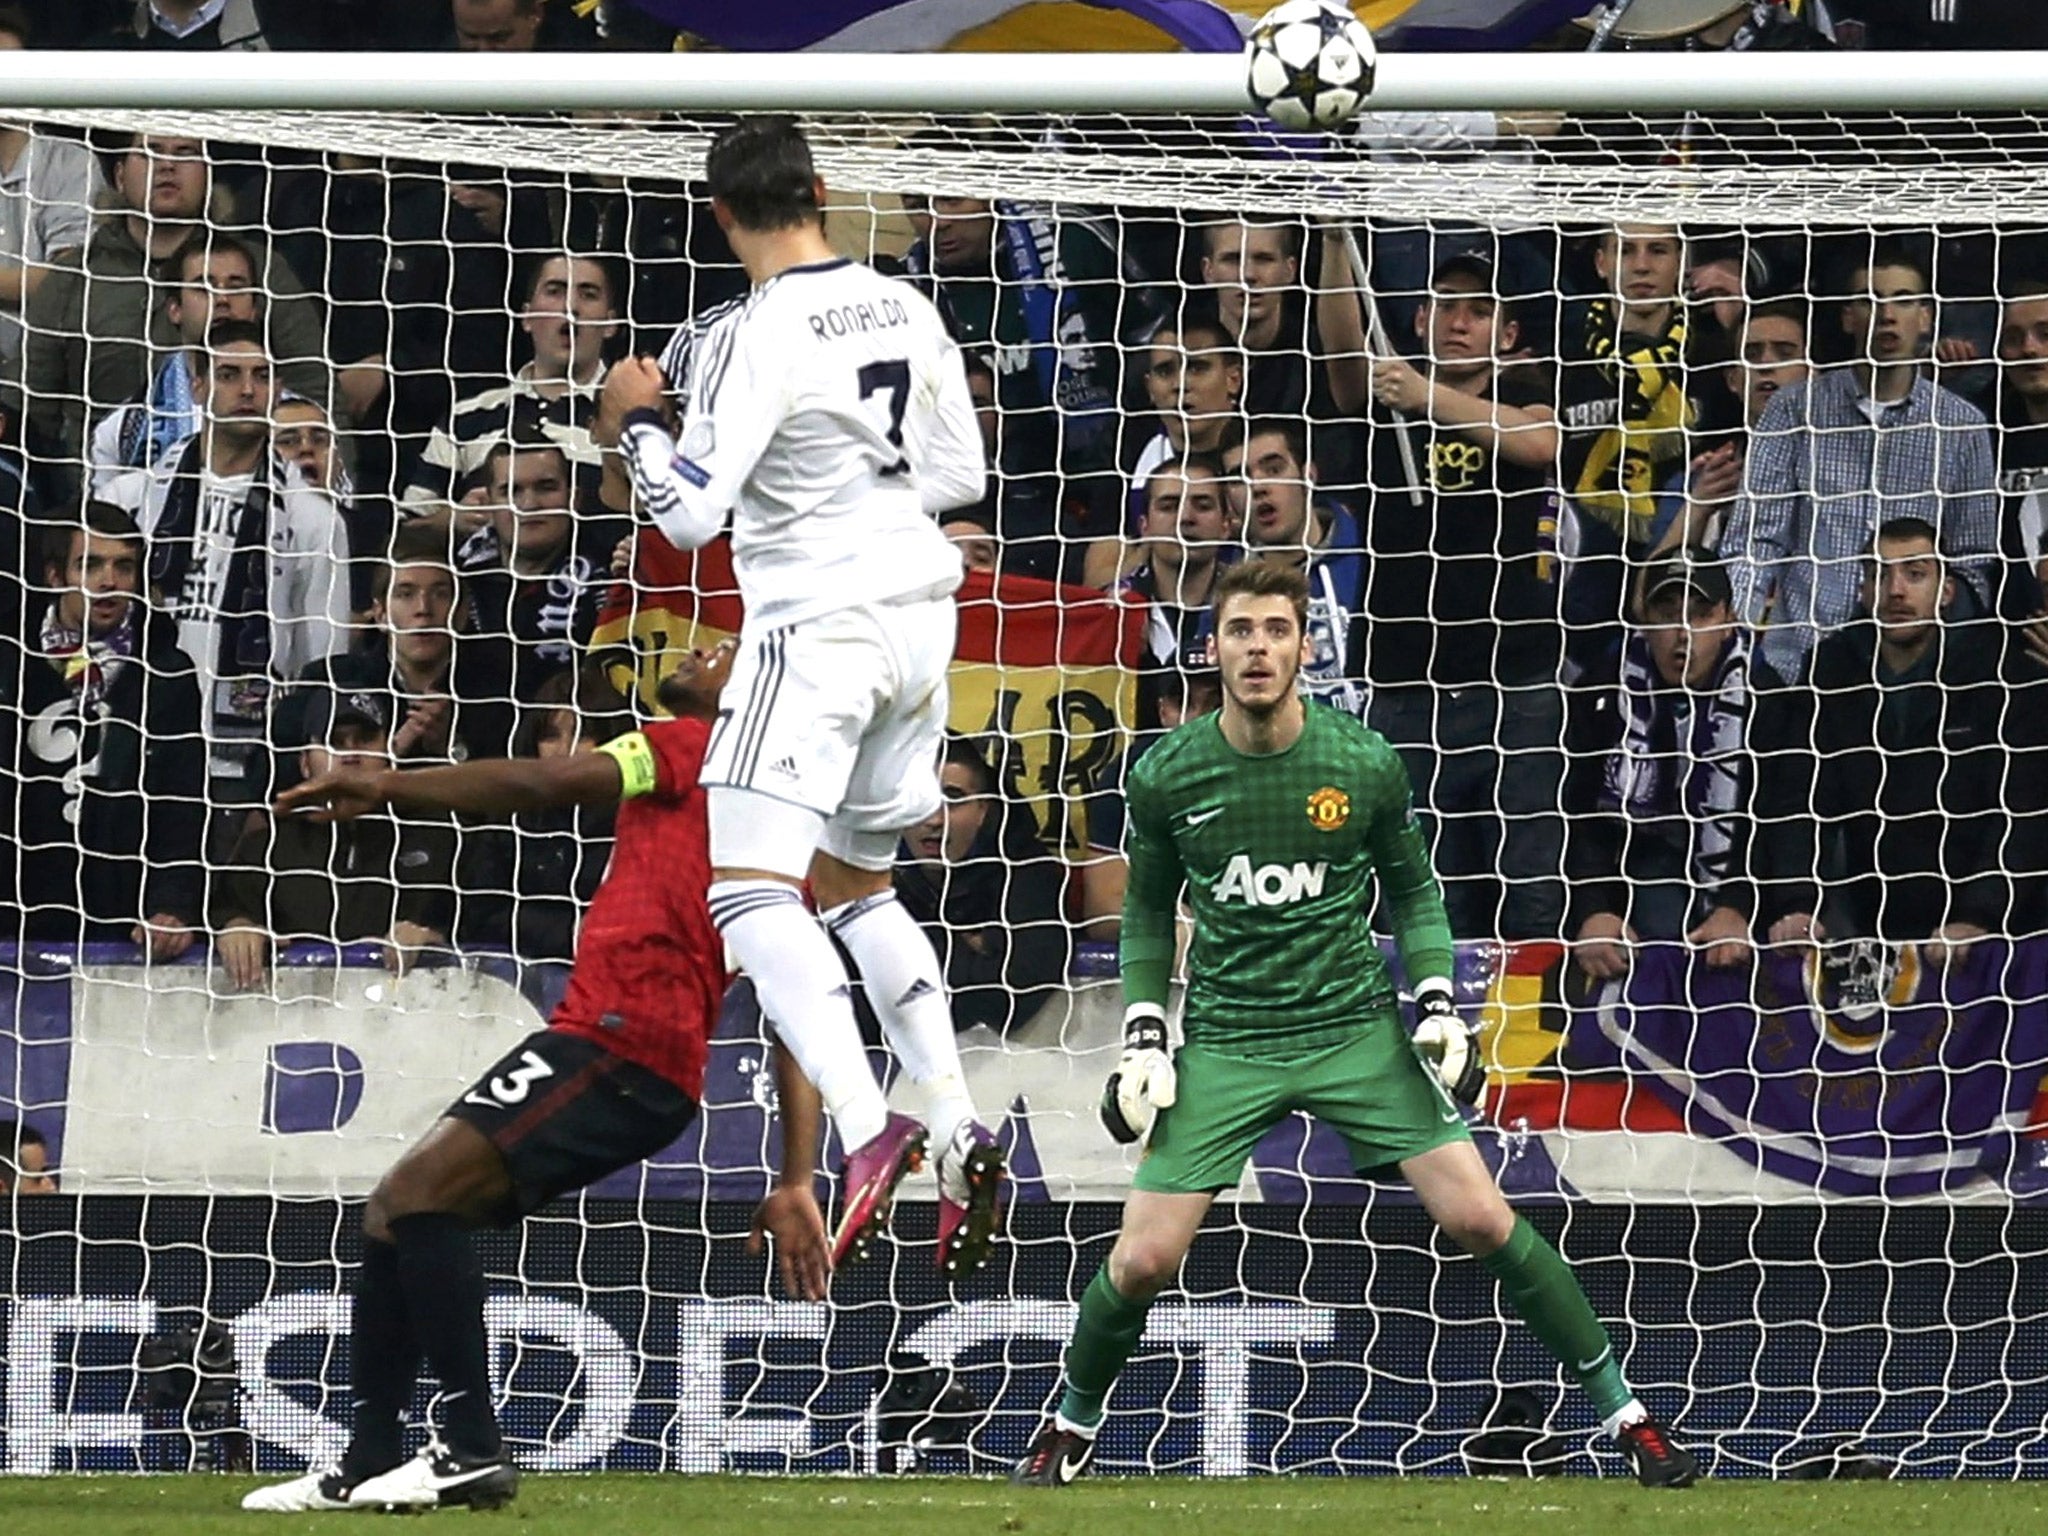 Cristiano Ronaldo beats Patrice Evra in the air to equalise